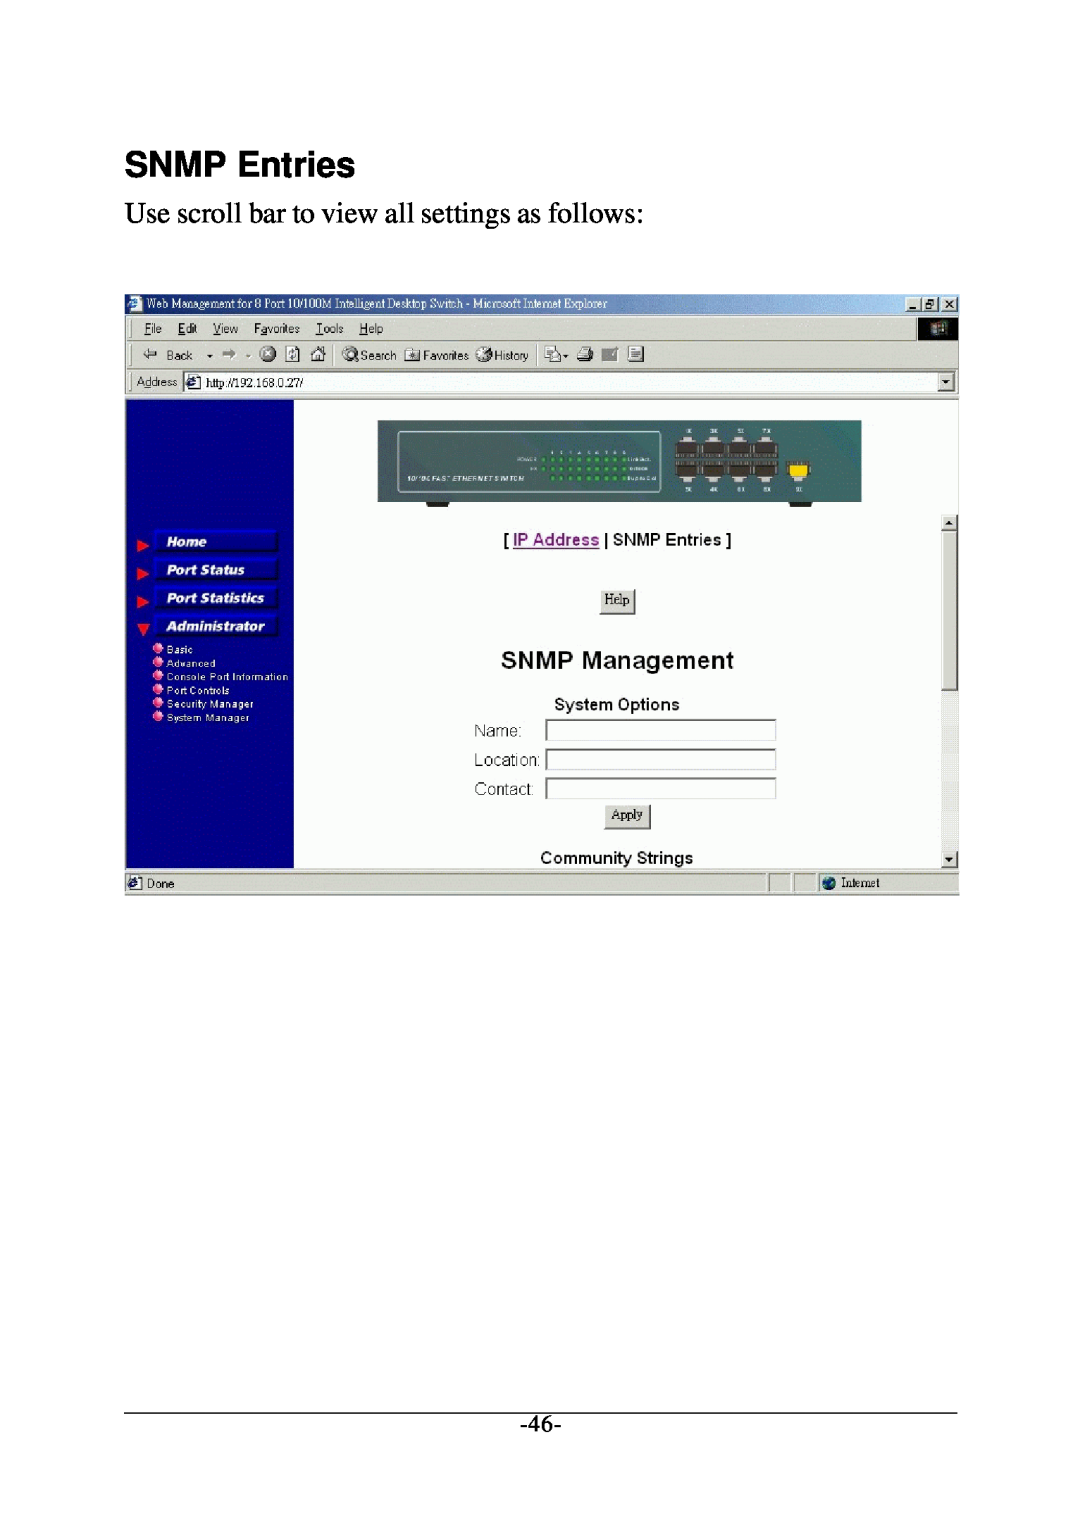 Xerox KS-801 operation manual SNMP Entries, Use scroll bar to view all settings as follows 